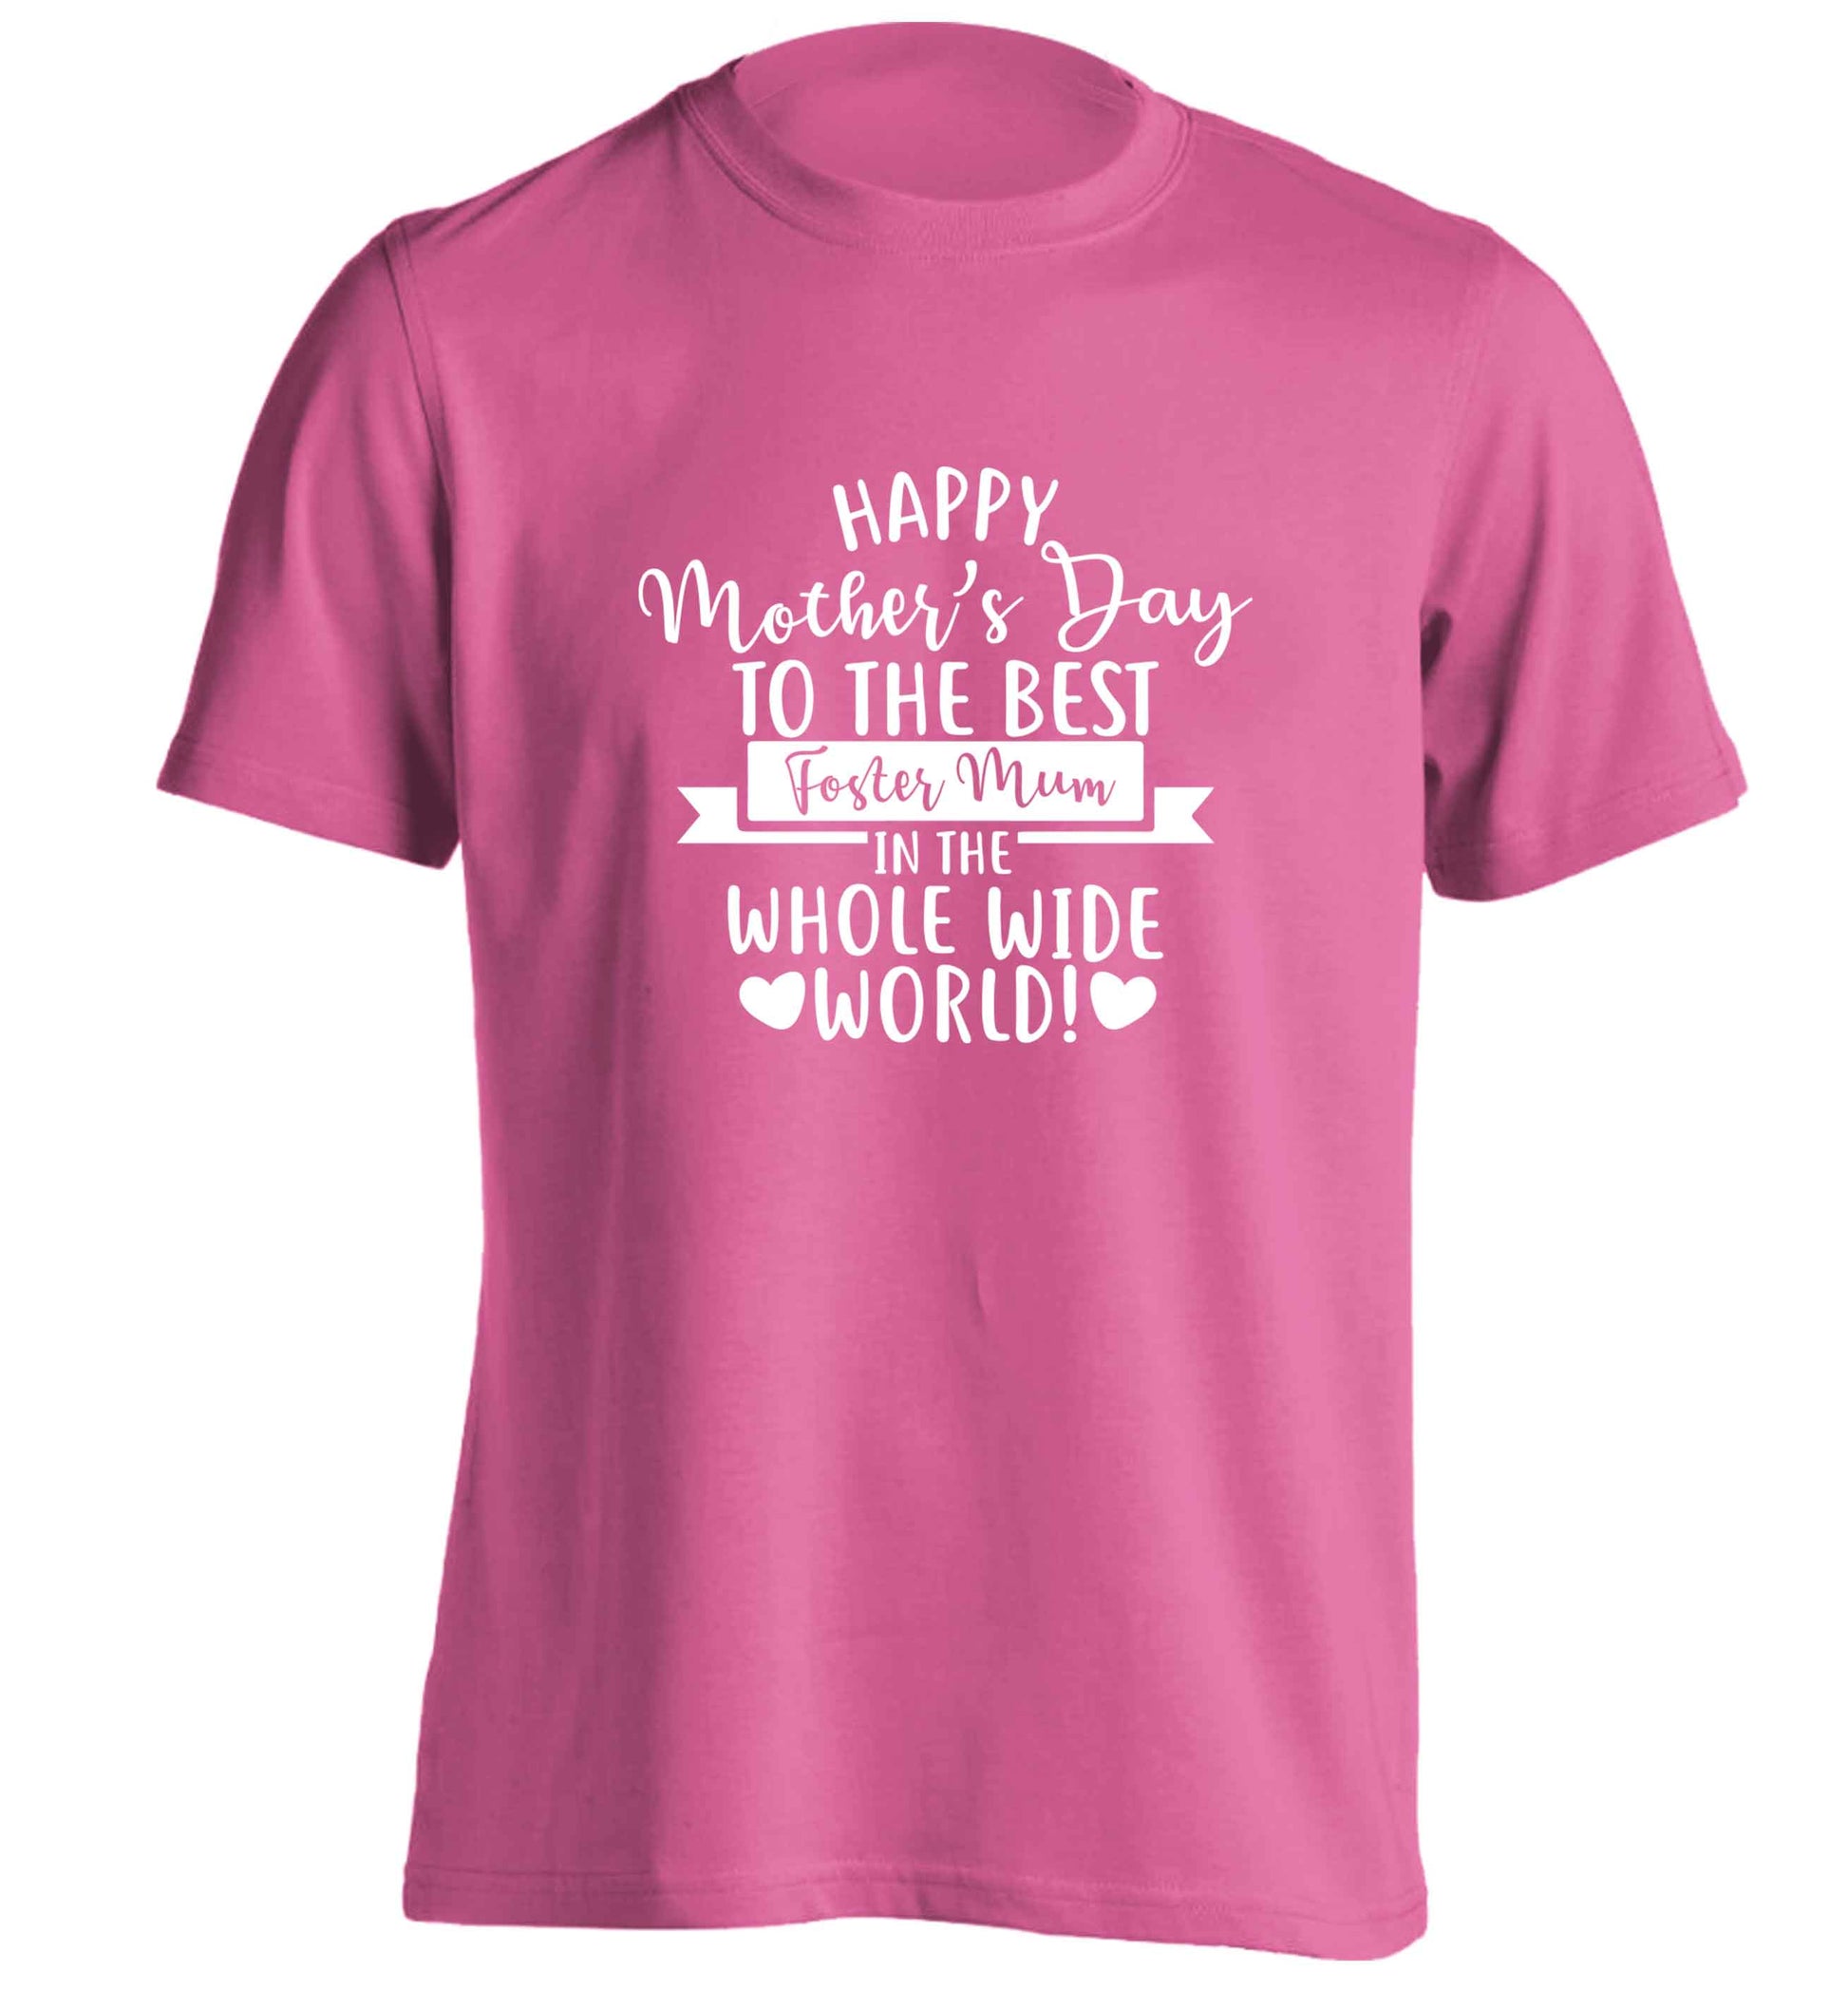 Happy mother's day to the best foster mum in the world adults unisex pink Tshirt 2XL